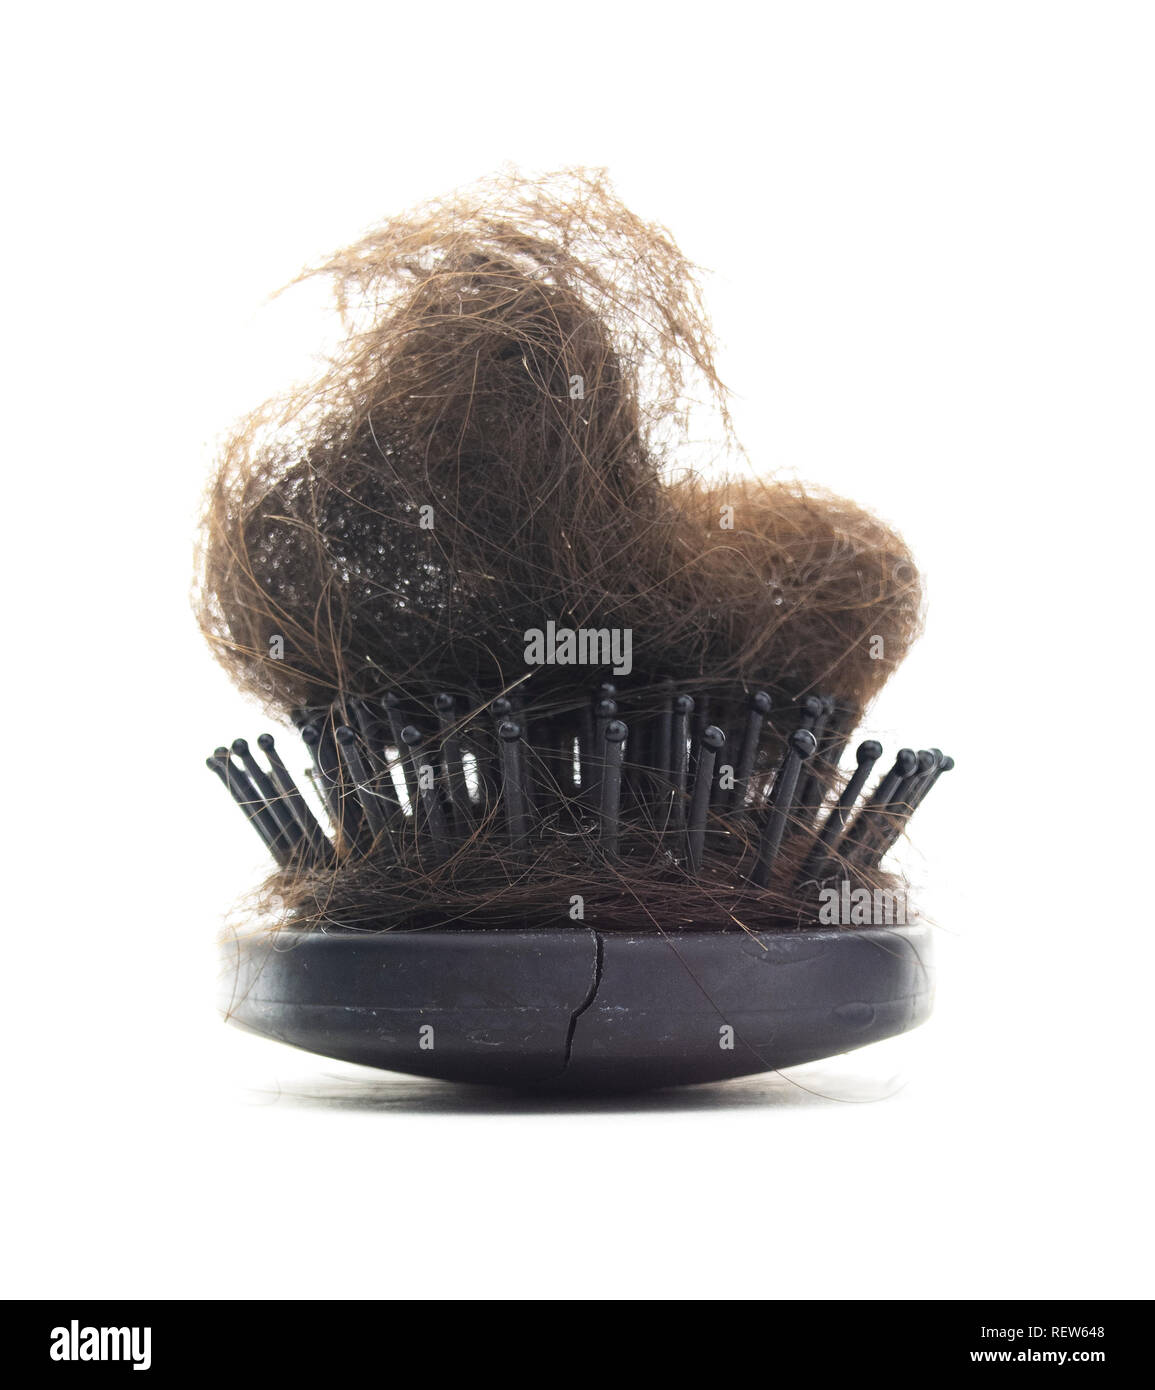 Isolated hairy hair brush. Black isolated hairbrush with lock of balding hair loss on a white background. Stock Photo